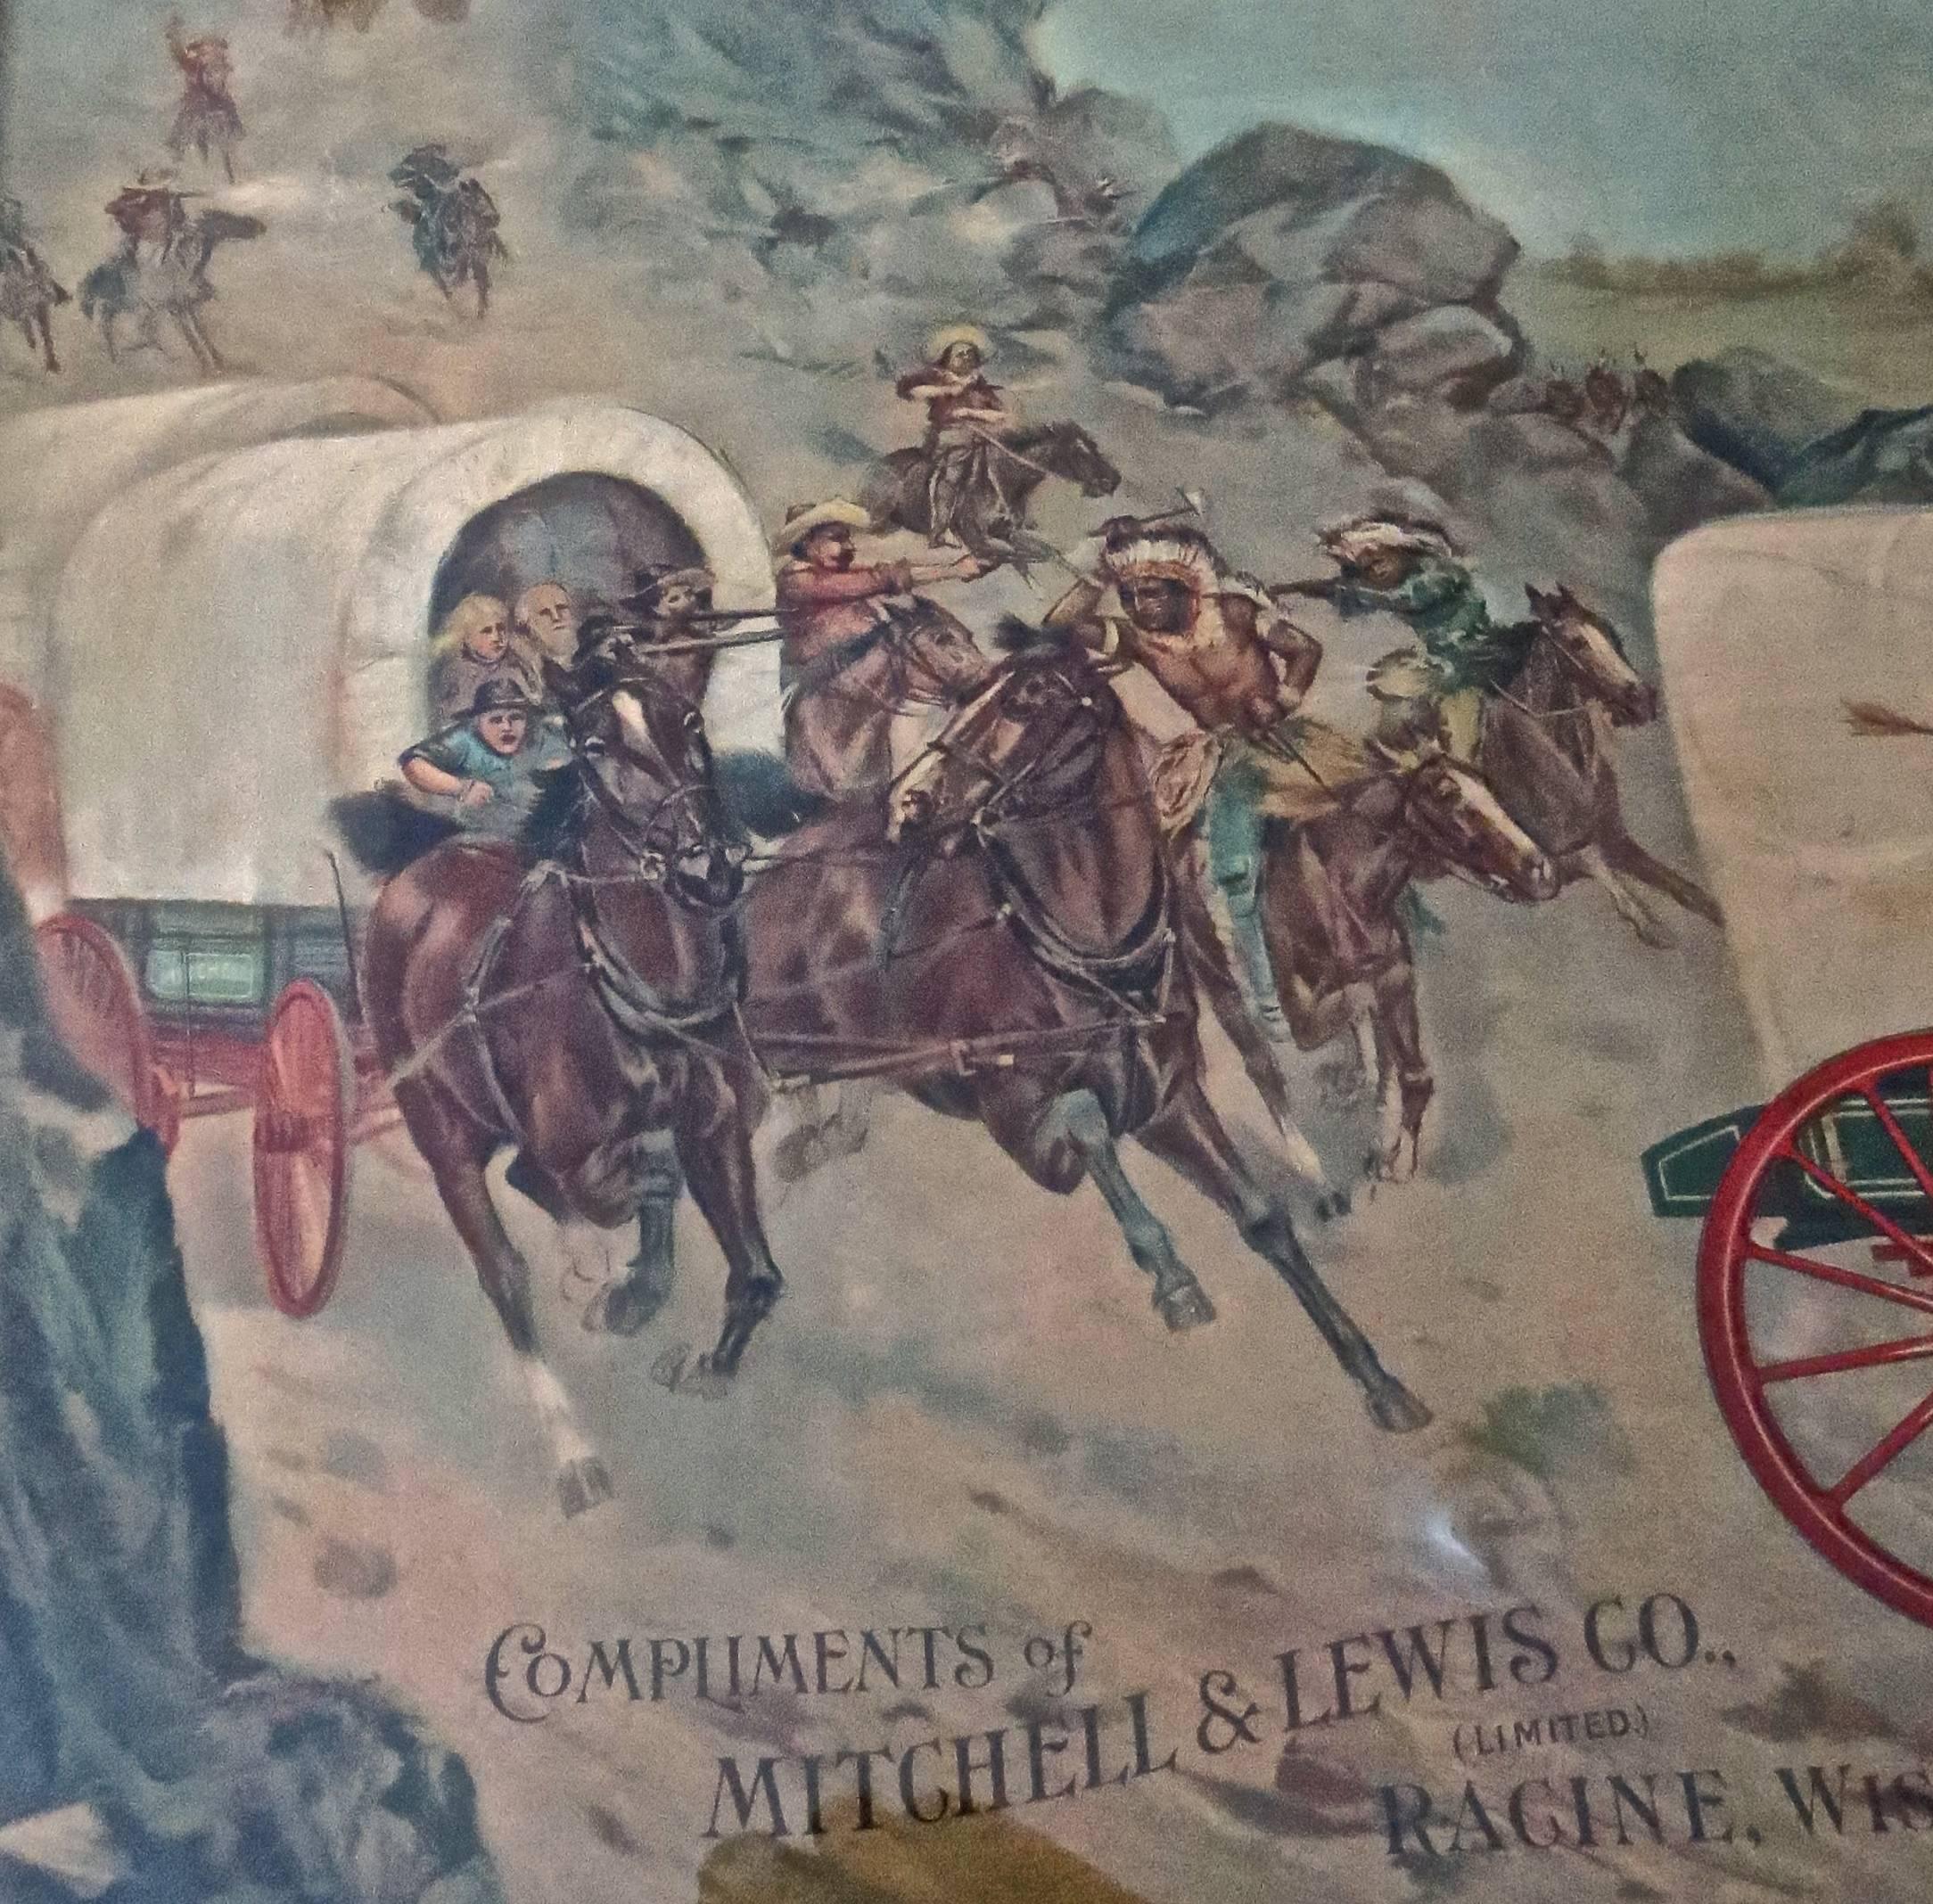 Native American Mitchell & Lewis Covered Wagon Advertising Lithograph, American, circa 1901